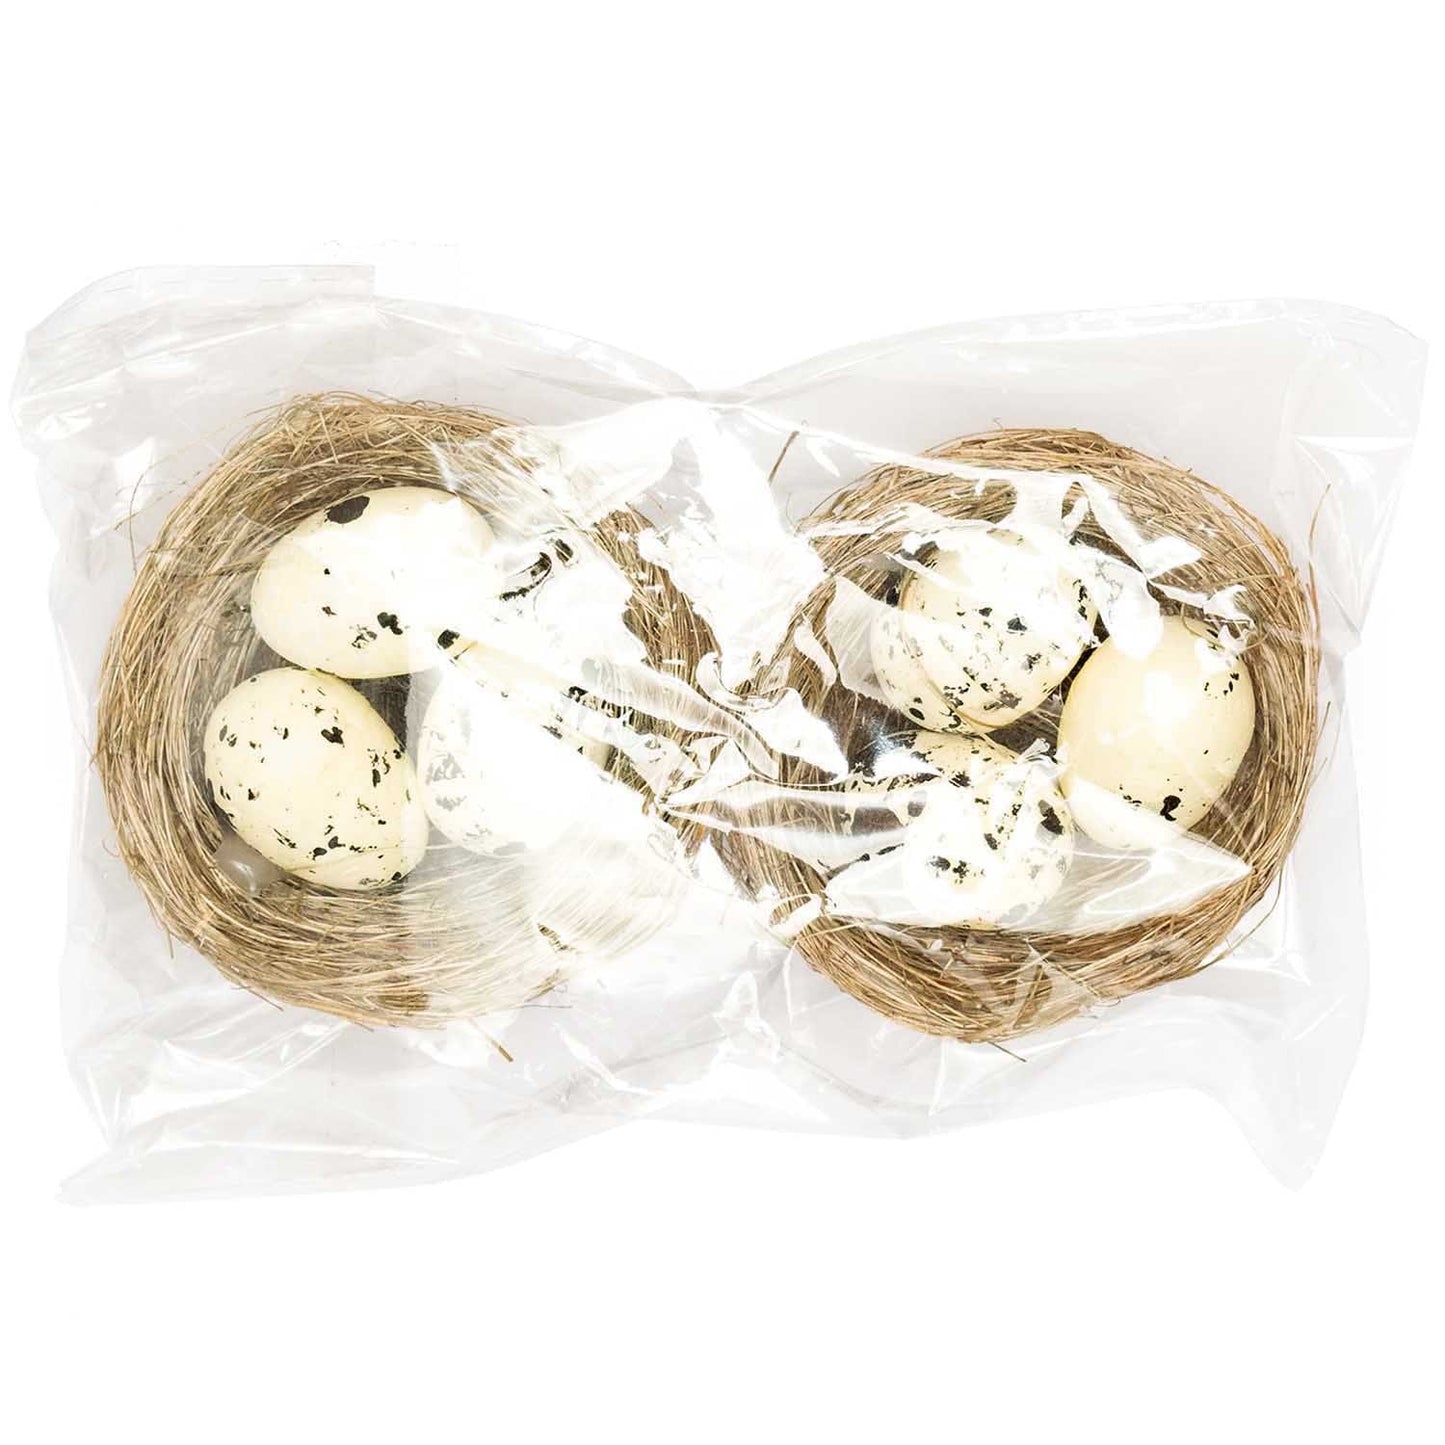 Easter Egg Nests | Easter Nest with speckled eggs Decorations UK Rico Design GMBH & Co